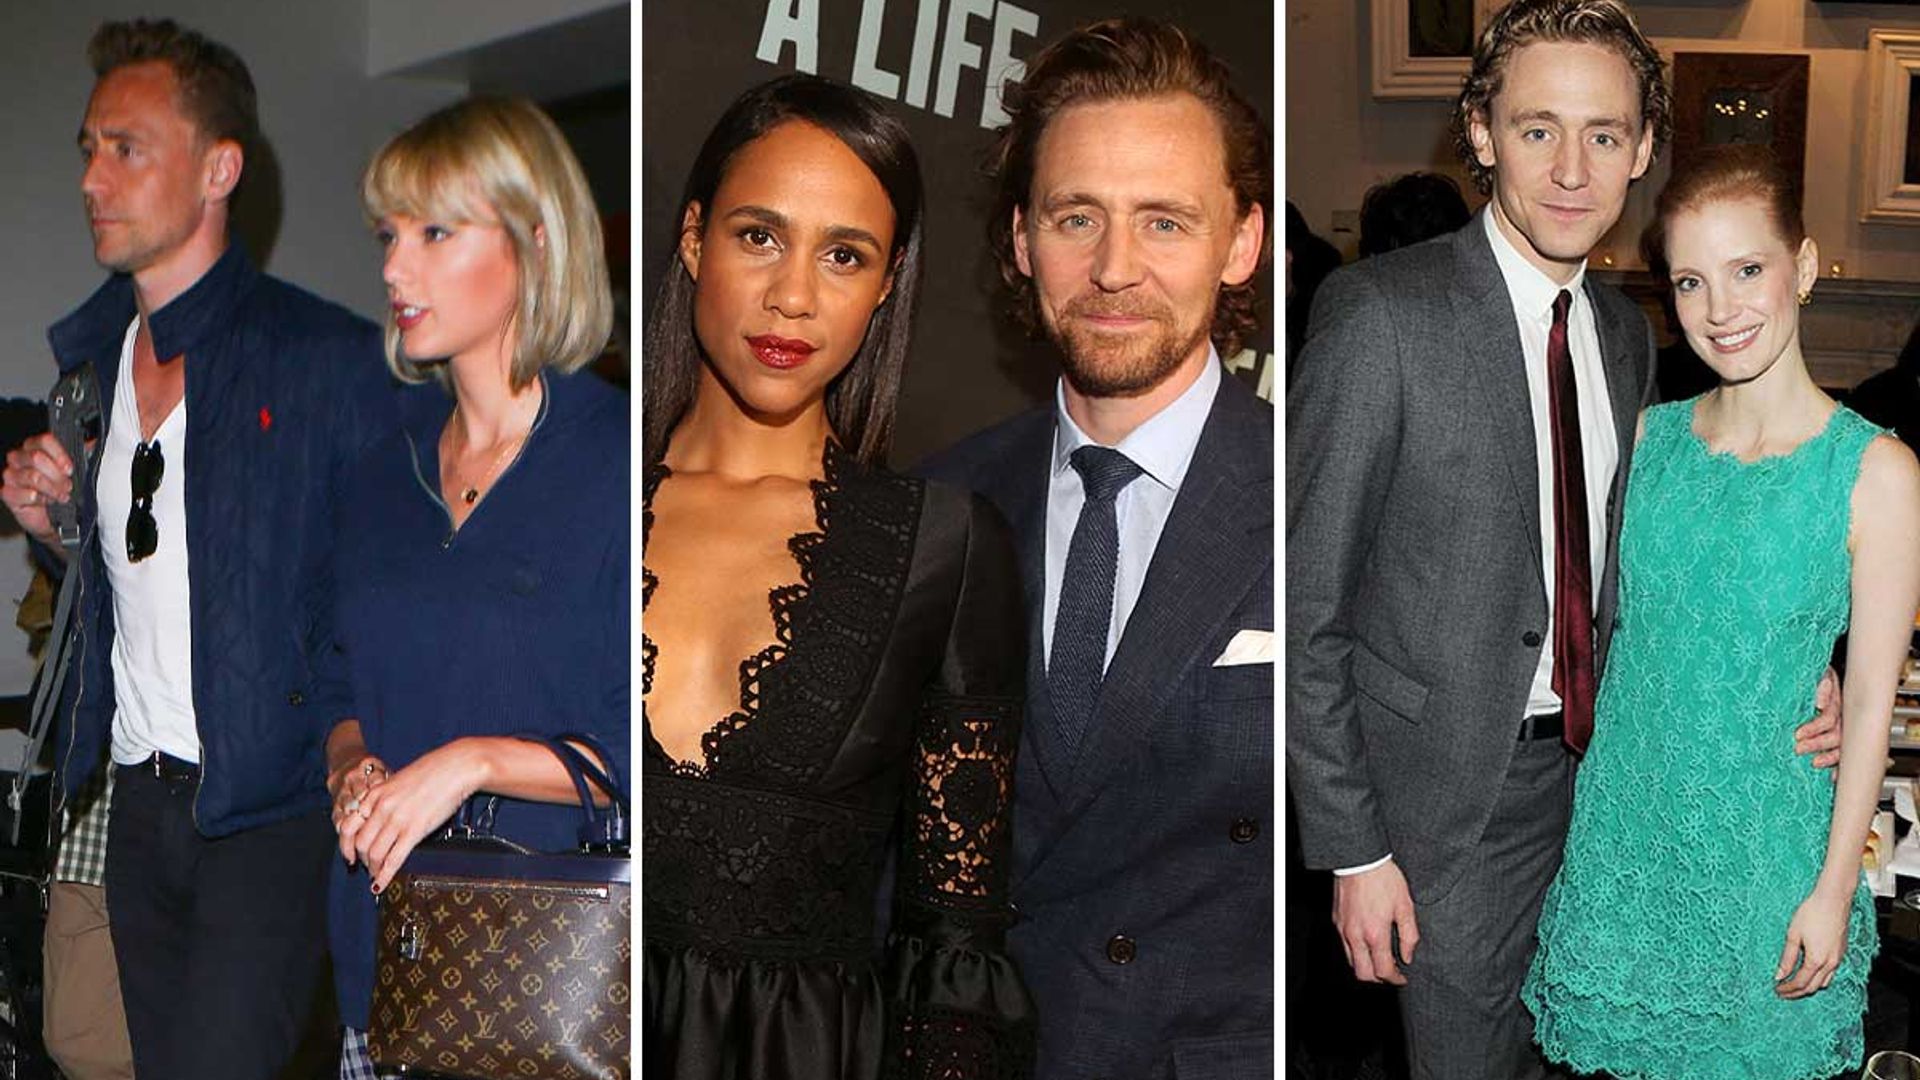 Everything you need to know about The Essex Serpent star Tom Hiddleston's love life